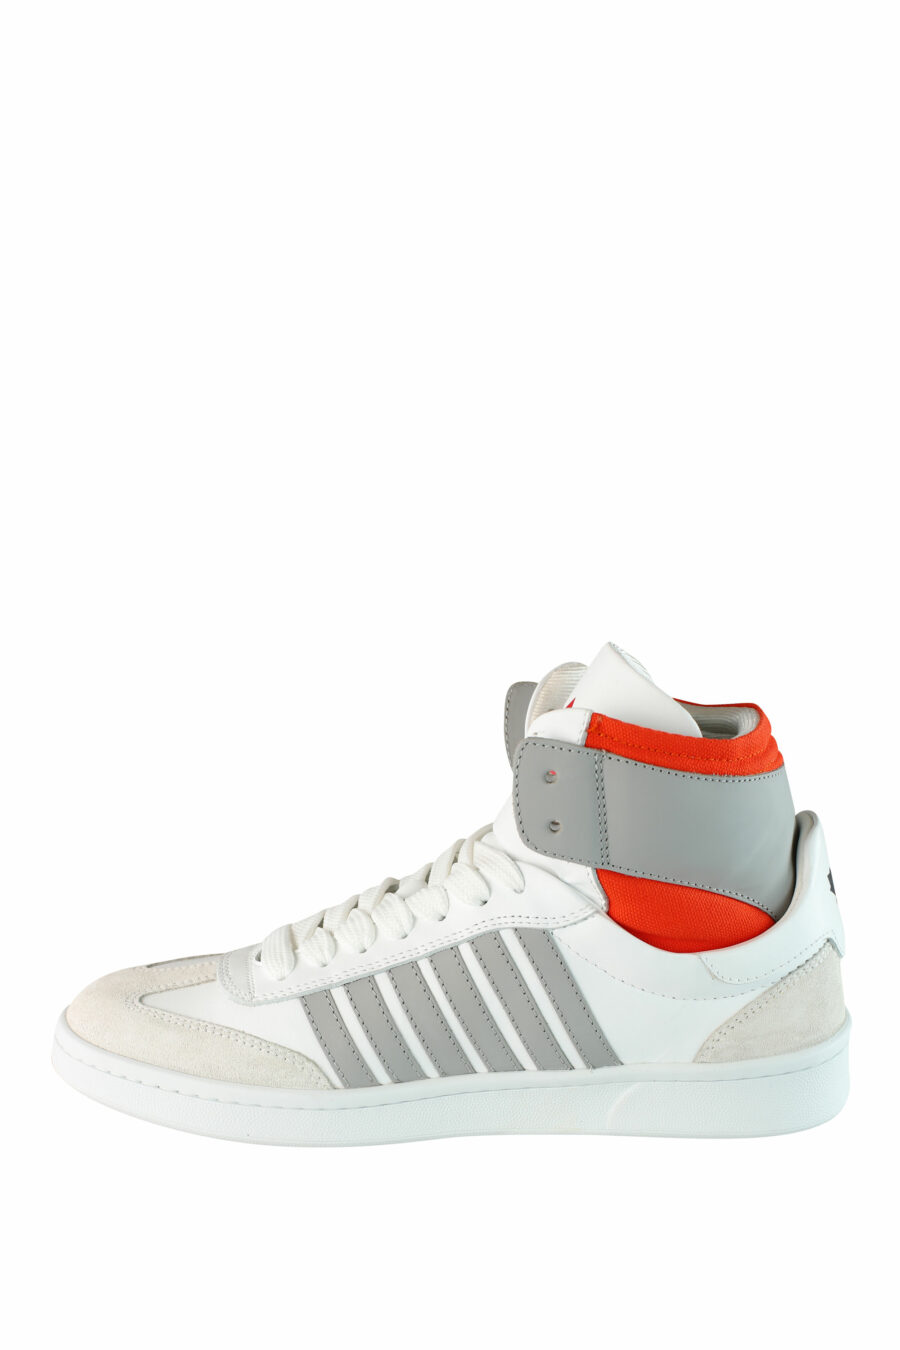 White mixed "boxer" bootie style trainers with orange and grey details - IMG 1503